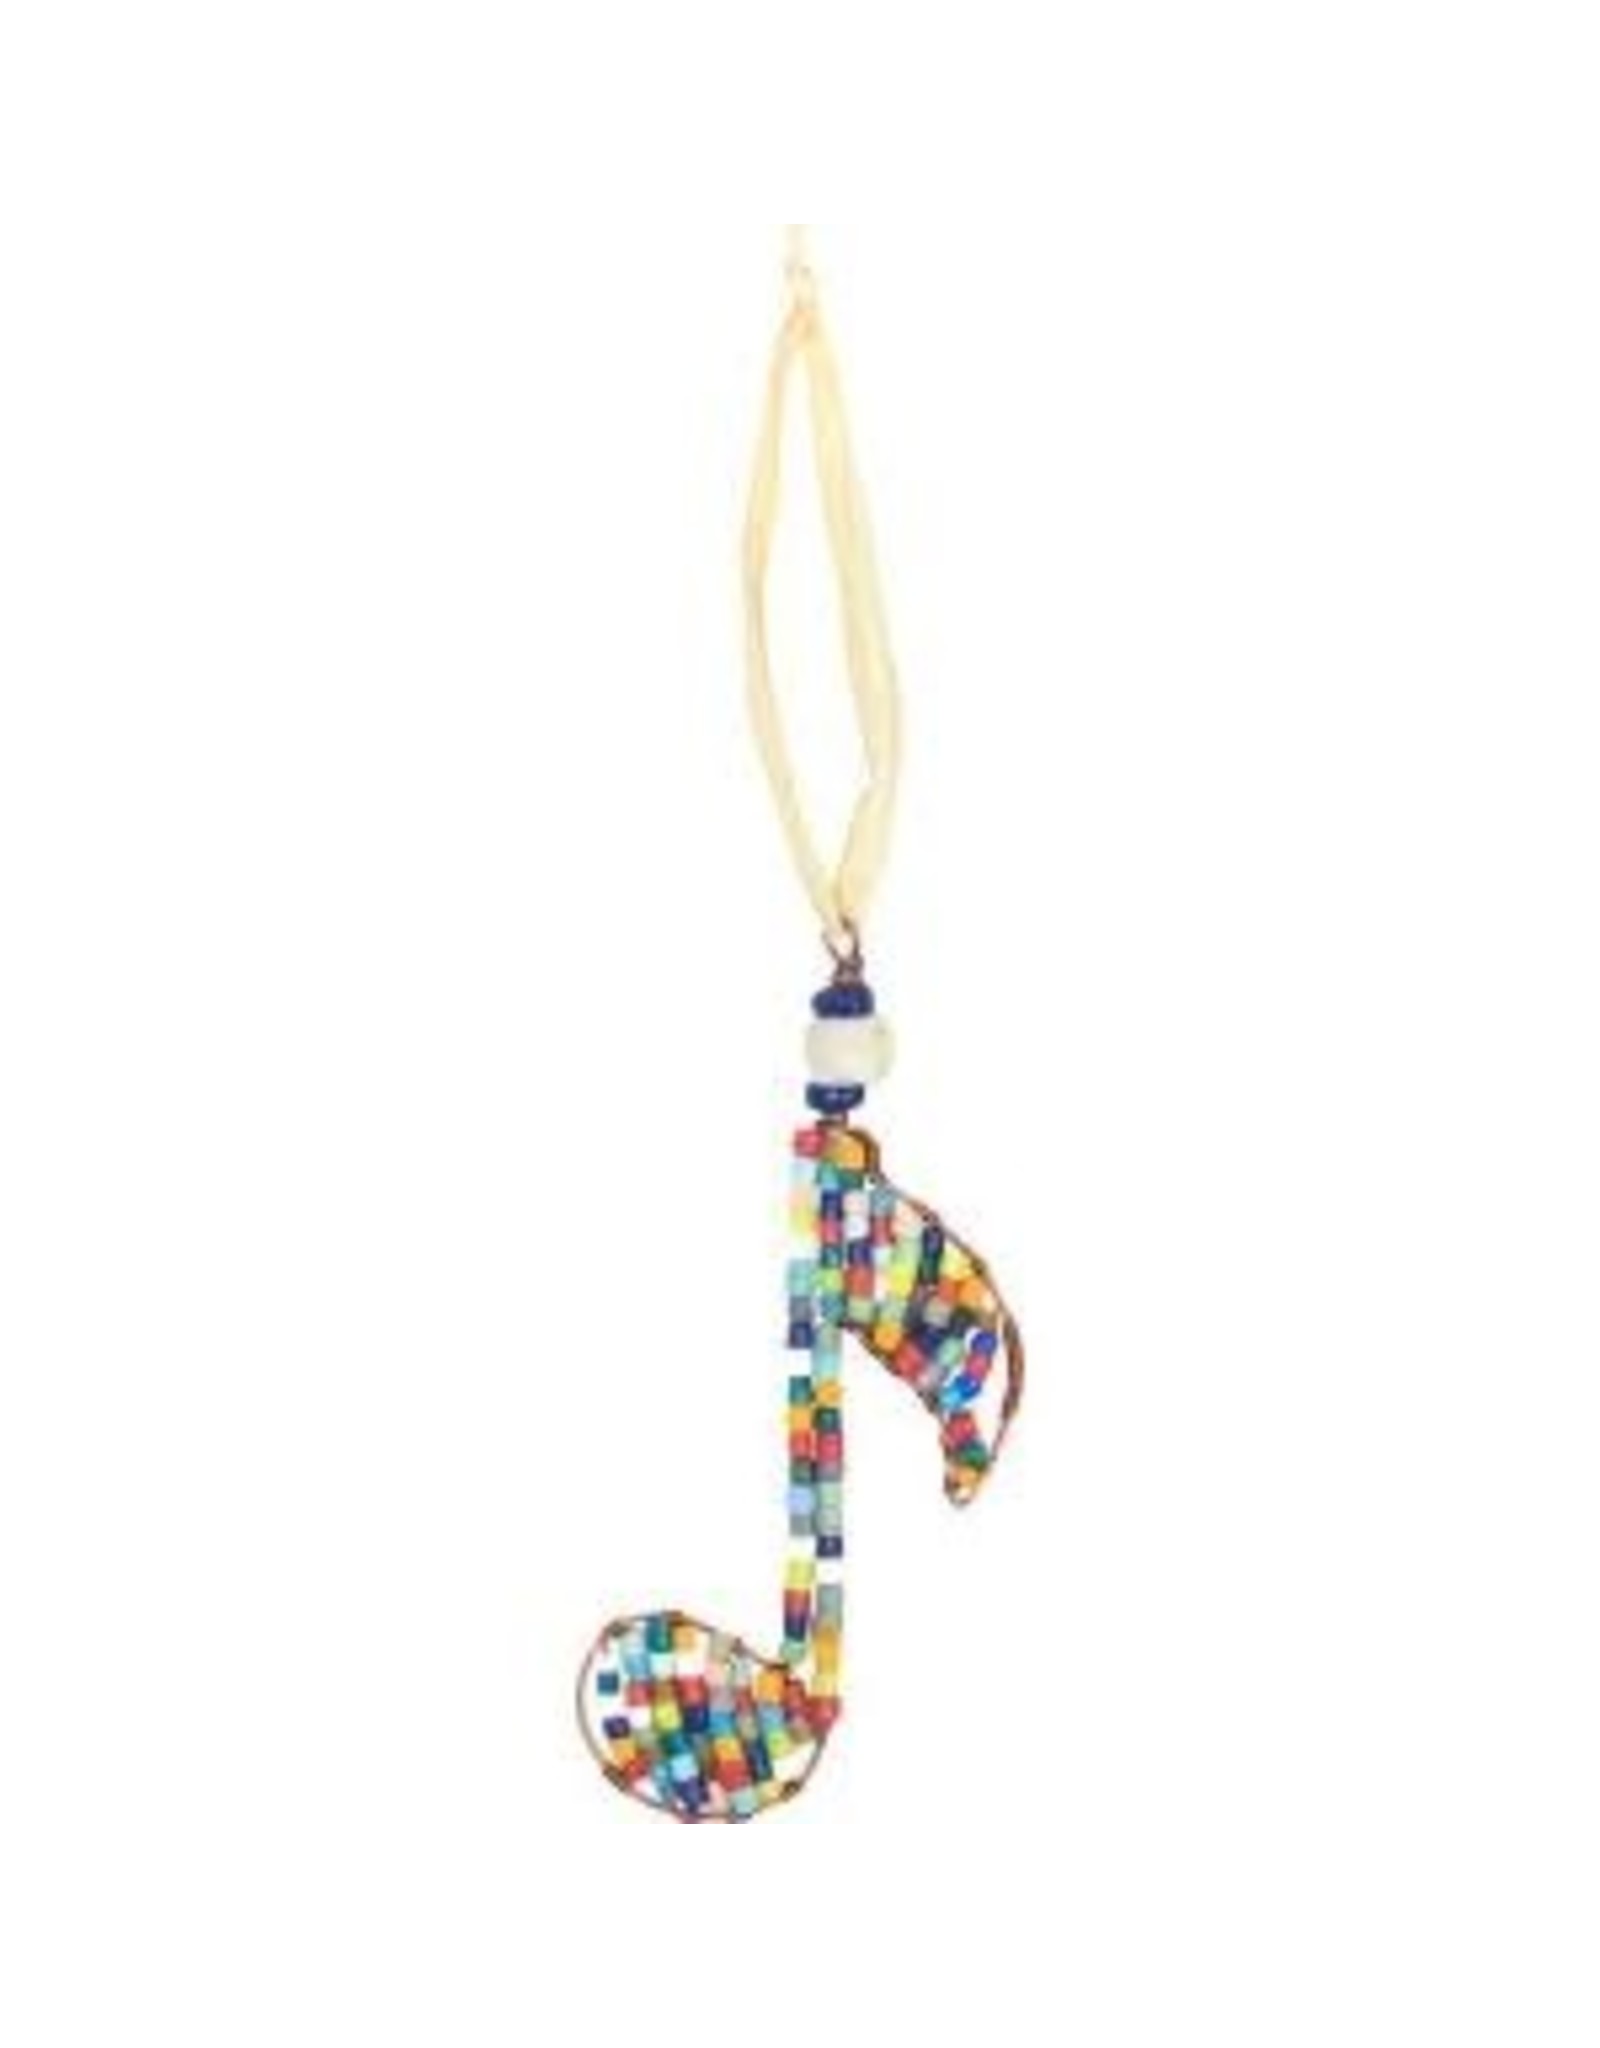 Trade roots Beaded Musical Note Ornament, Ghana